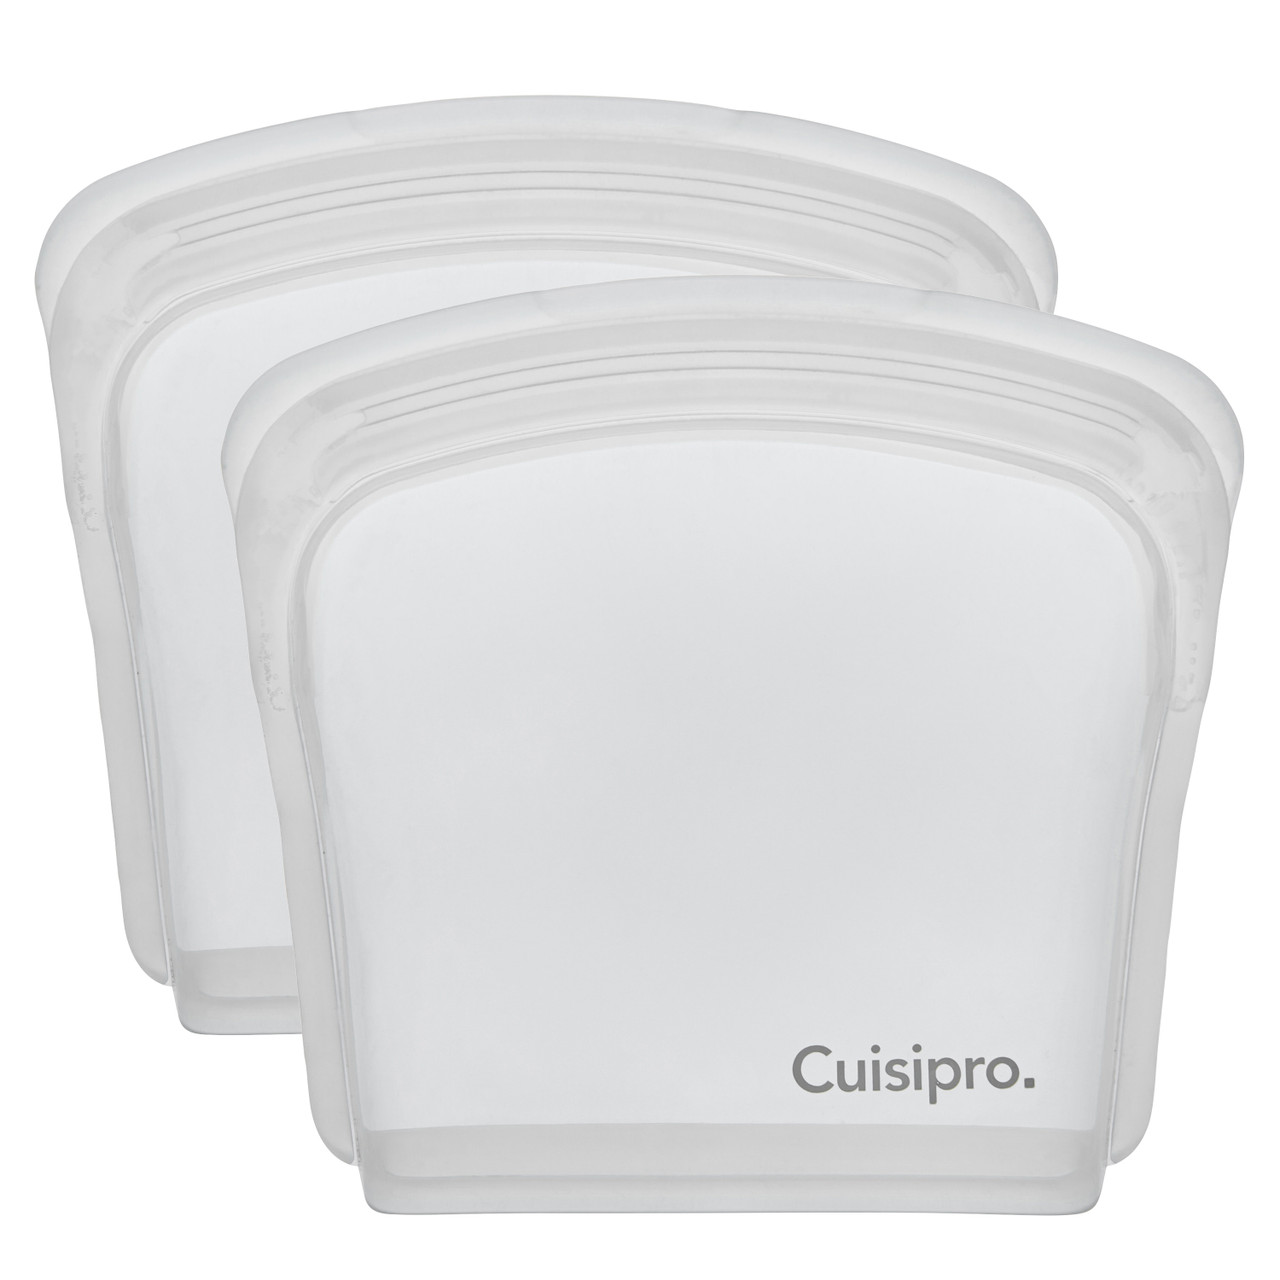 Cuisipro Pack-It Bag Collection - Silicone Reusable Bag- 200ml (6.75oz.) - Set of 2 - Clear (BC 74792400)